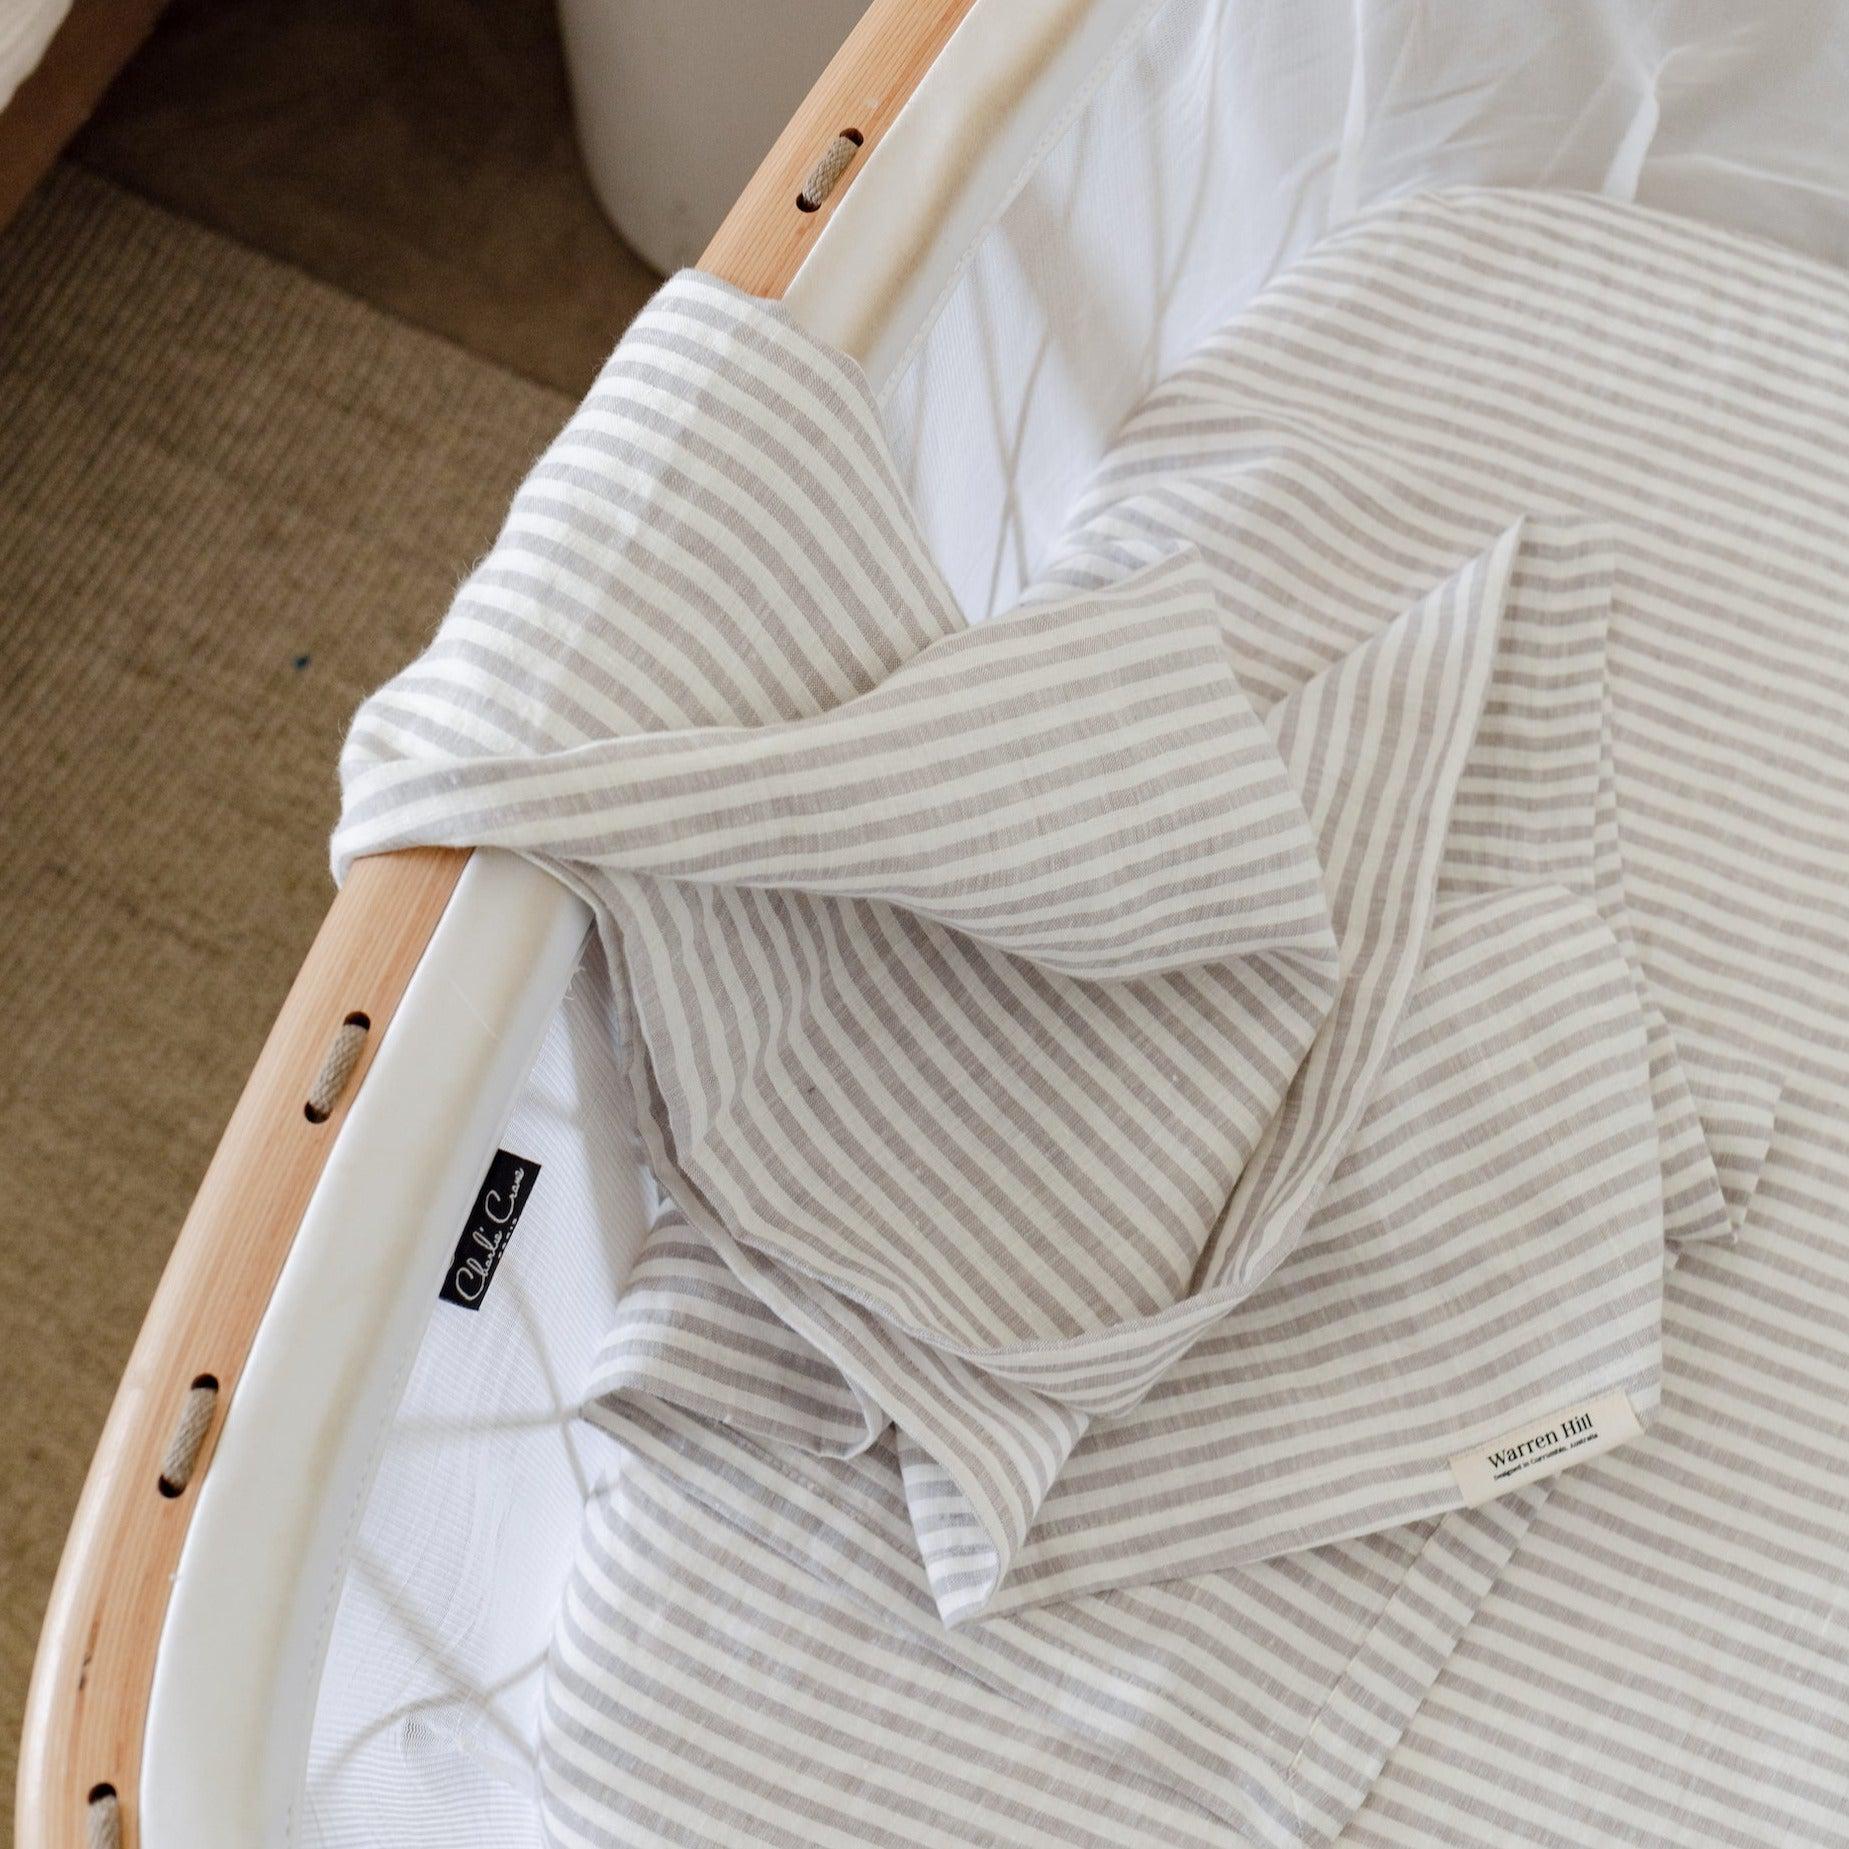 A white and grey striped french linen baby swaddle by Warren Hill in a crib made with breathable stonewashed linen.